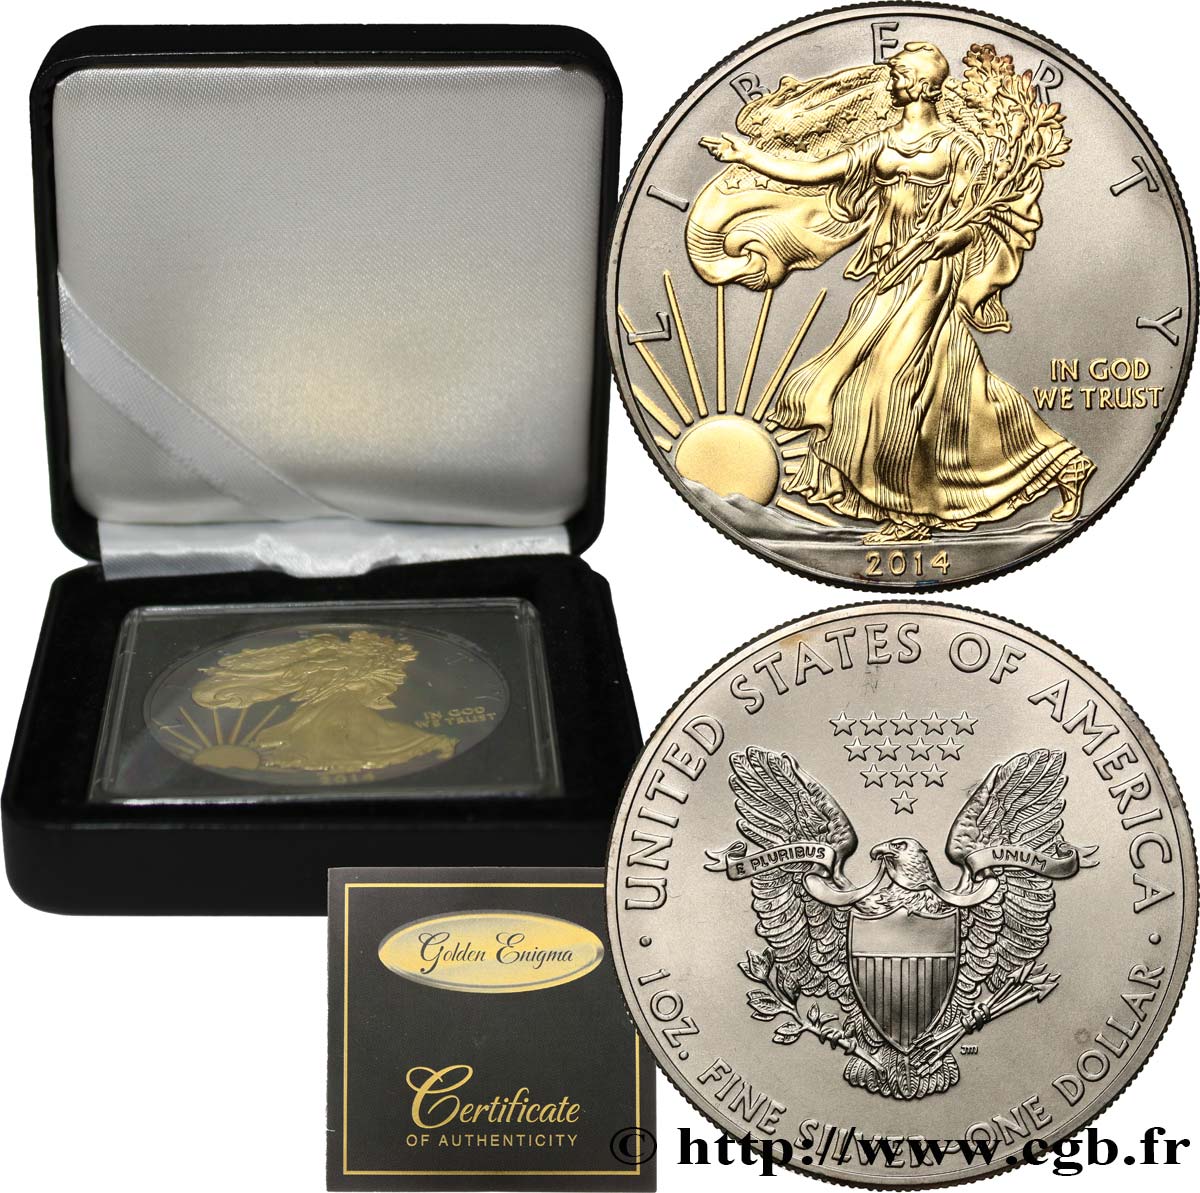 UNITED STATES OF AMERICA 1 Dollar type Liberty Silver Eagle 2014  MS 